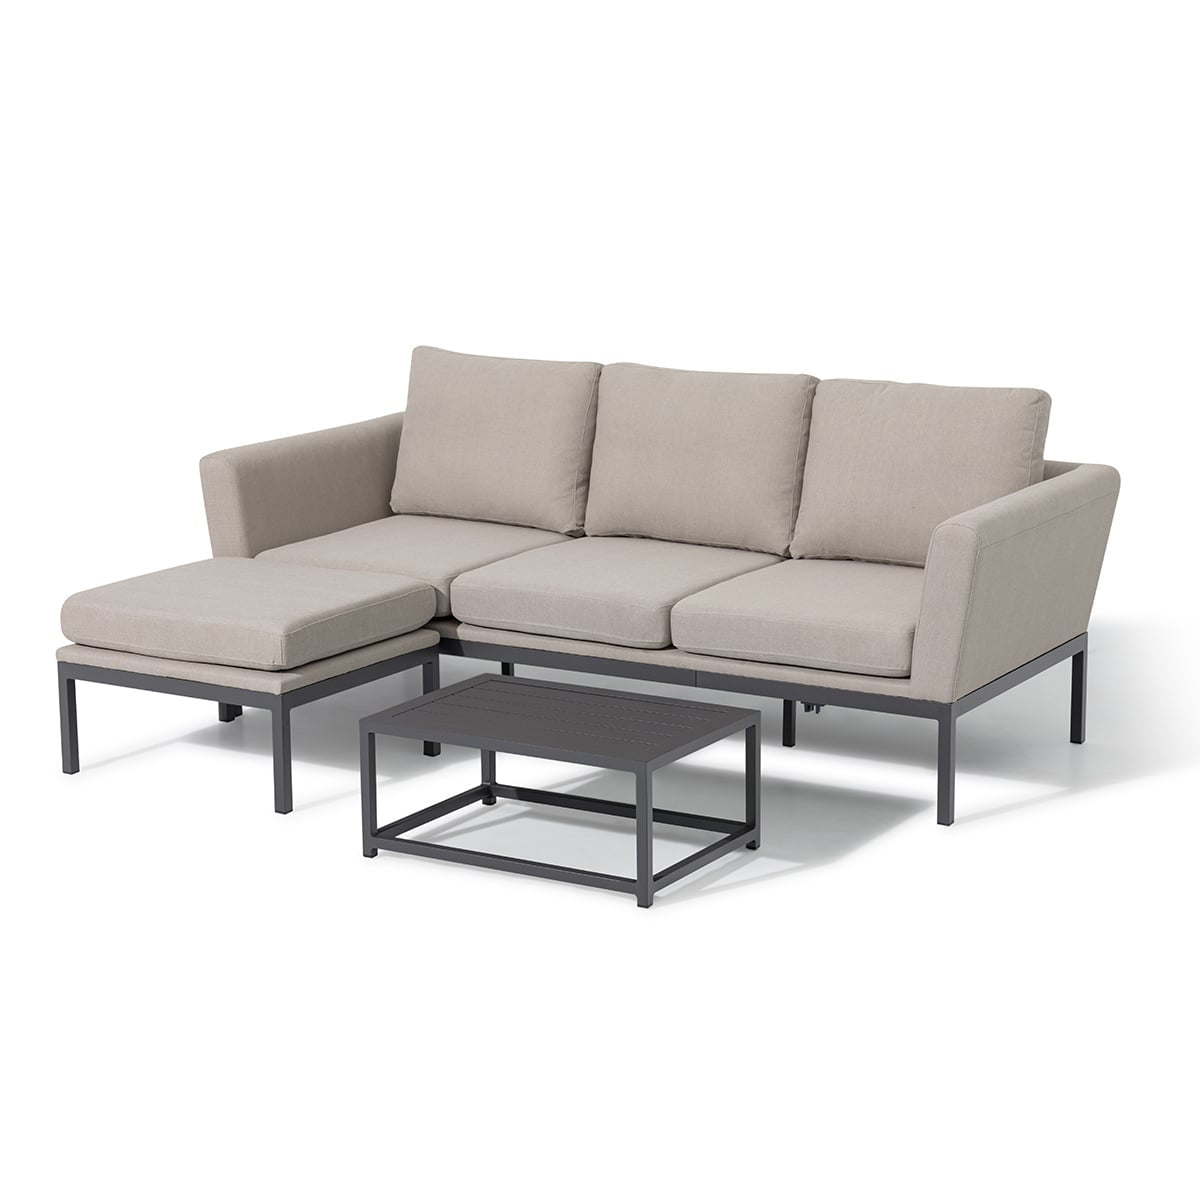 Maze Outdoor Pulse Chaise Sofa Set In Oatmeal